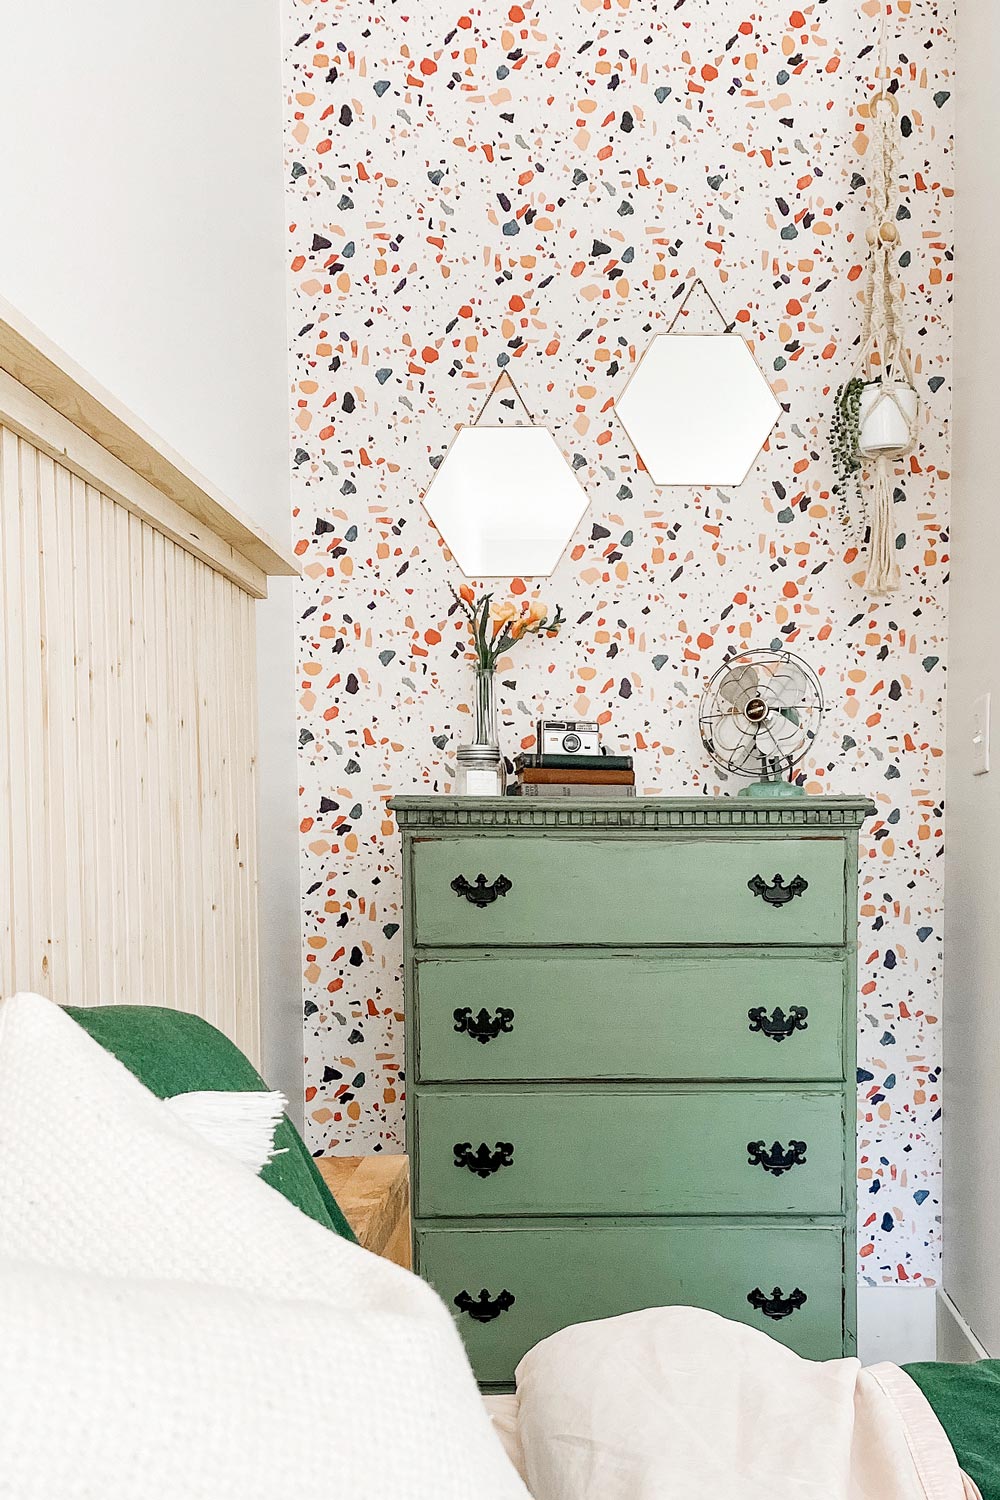 Colorful Terrazzo removable wallpaper styled in rustic bedroom interior